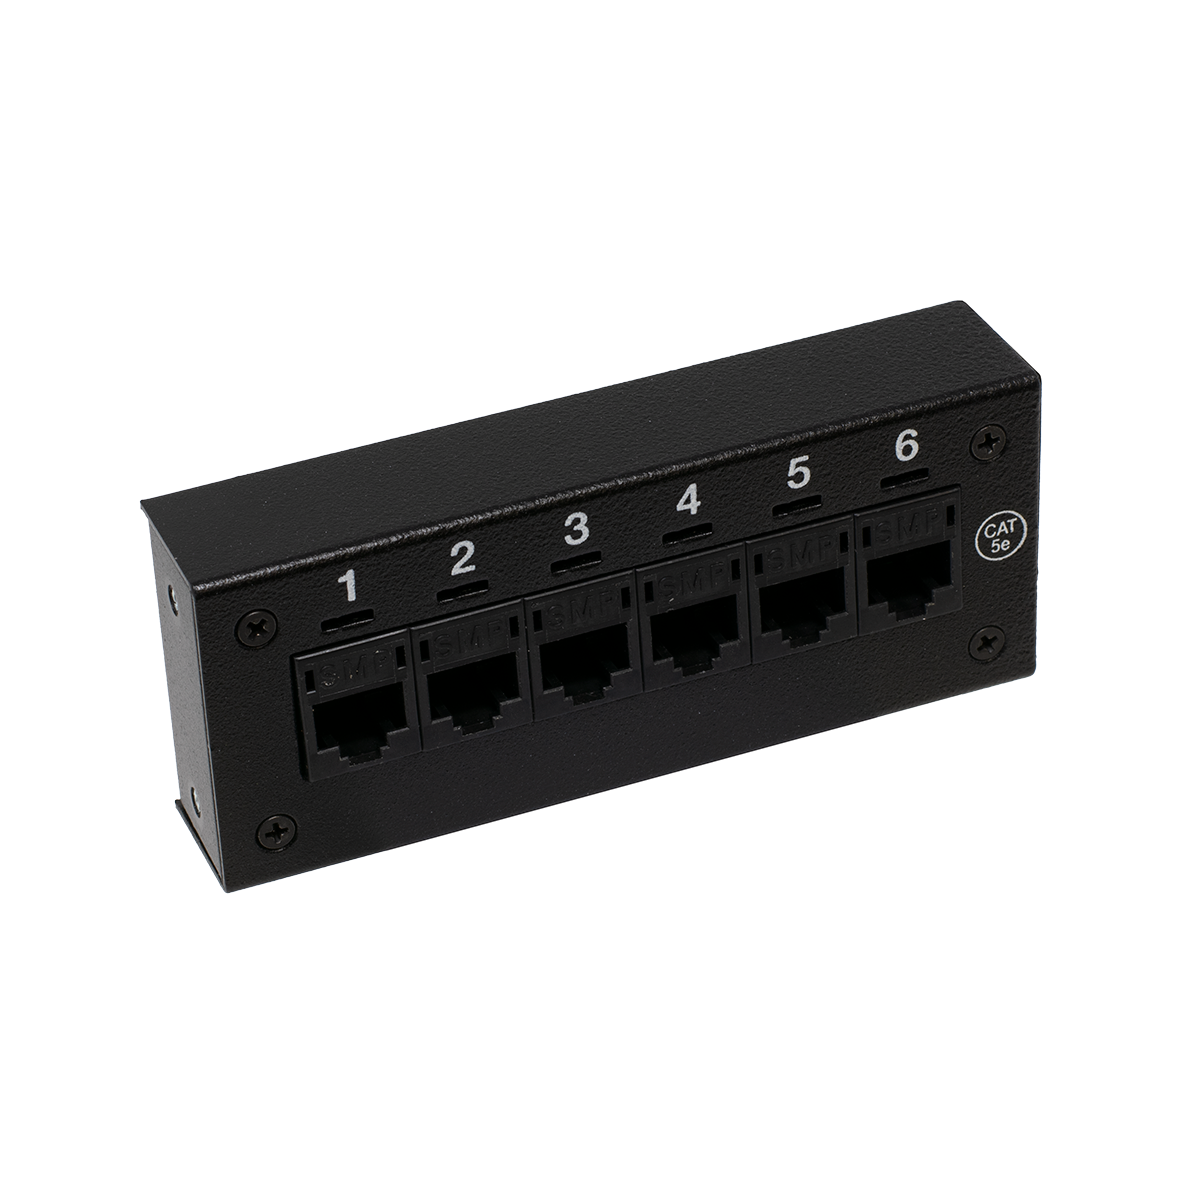 CAT5E 6 Port Patch Block with Female 25 Pair Telco Connector (Front View)